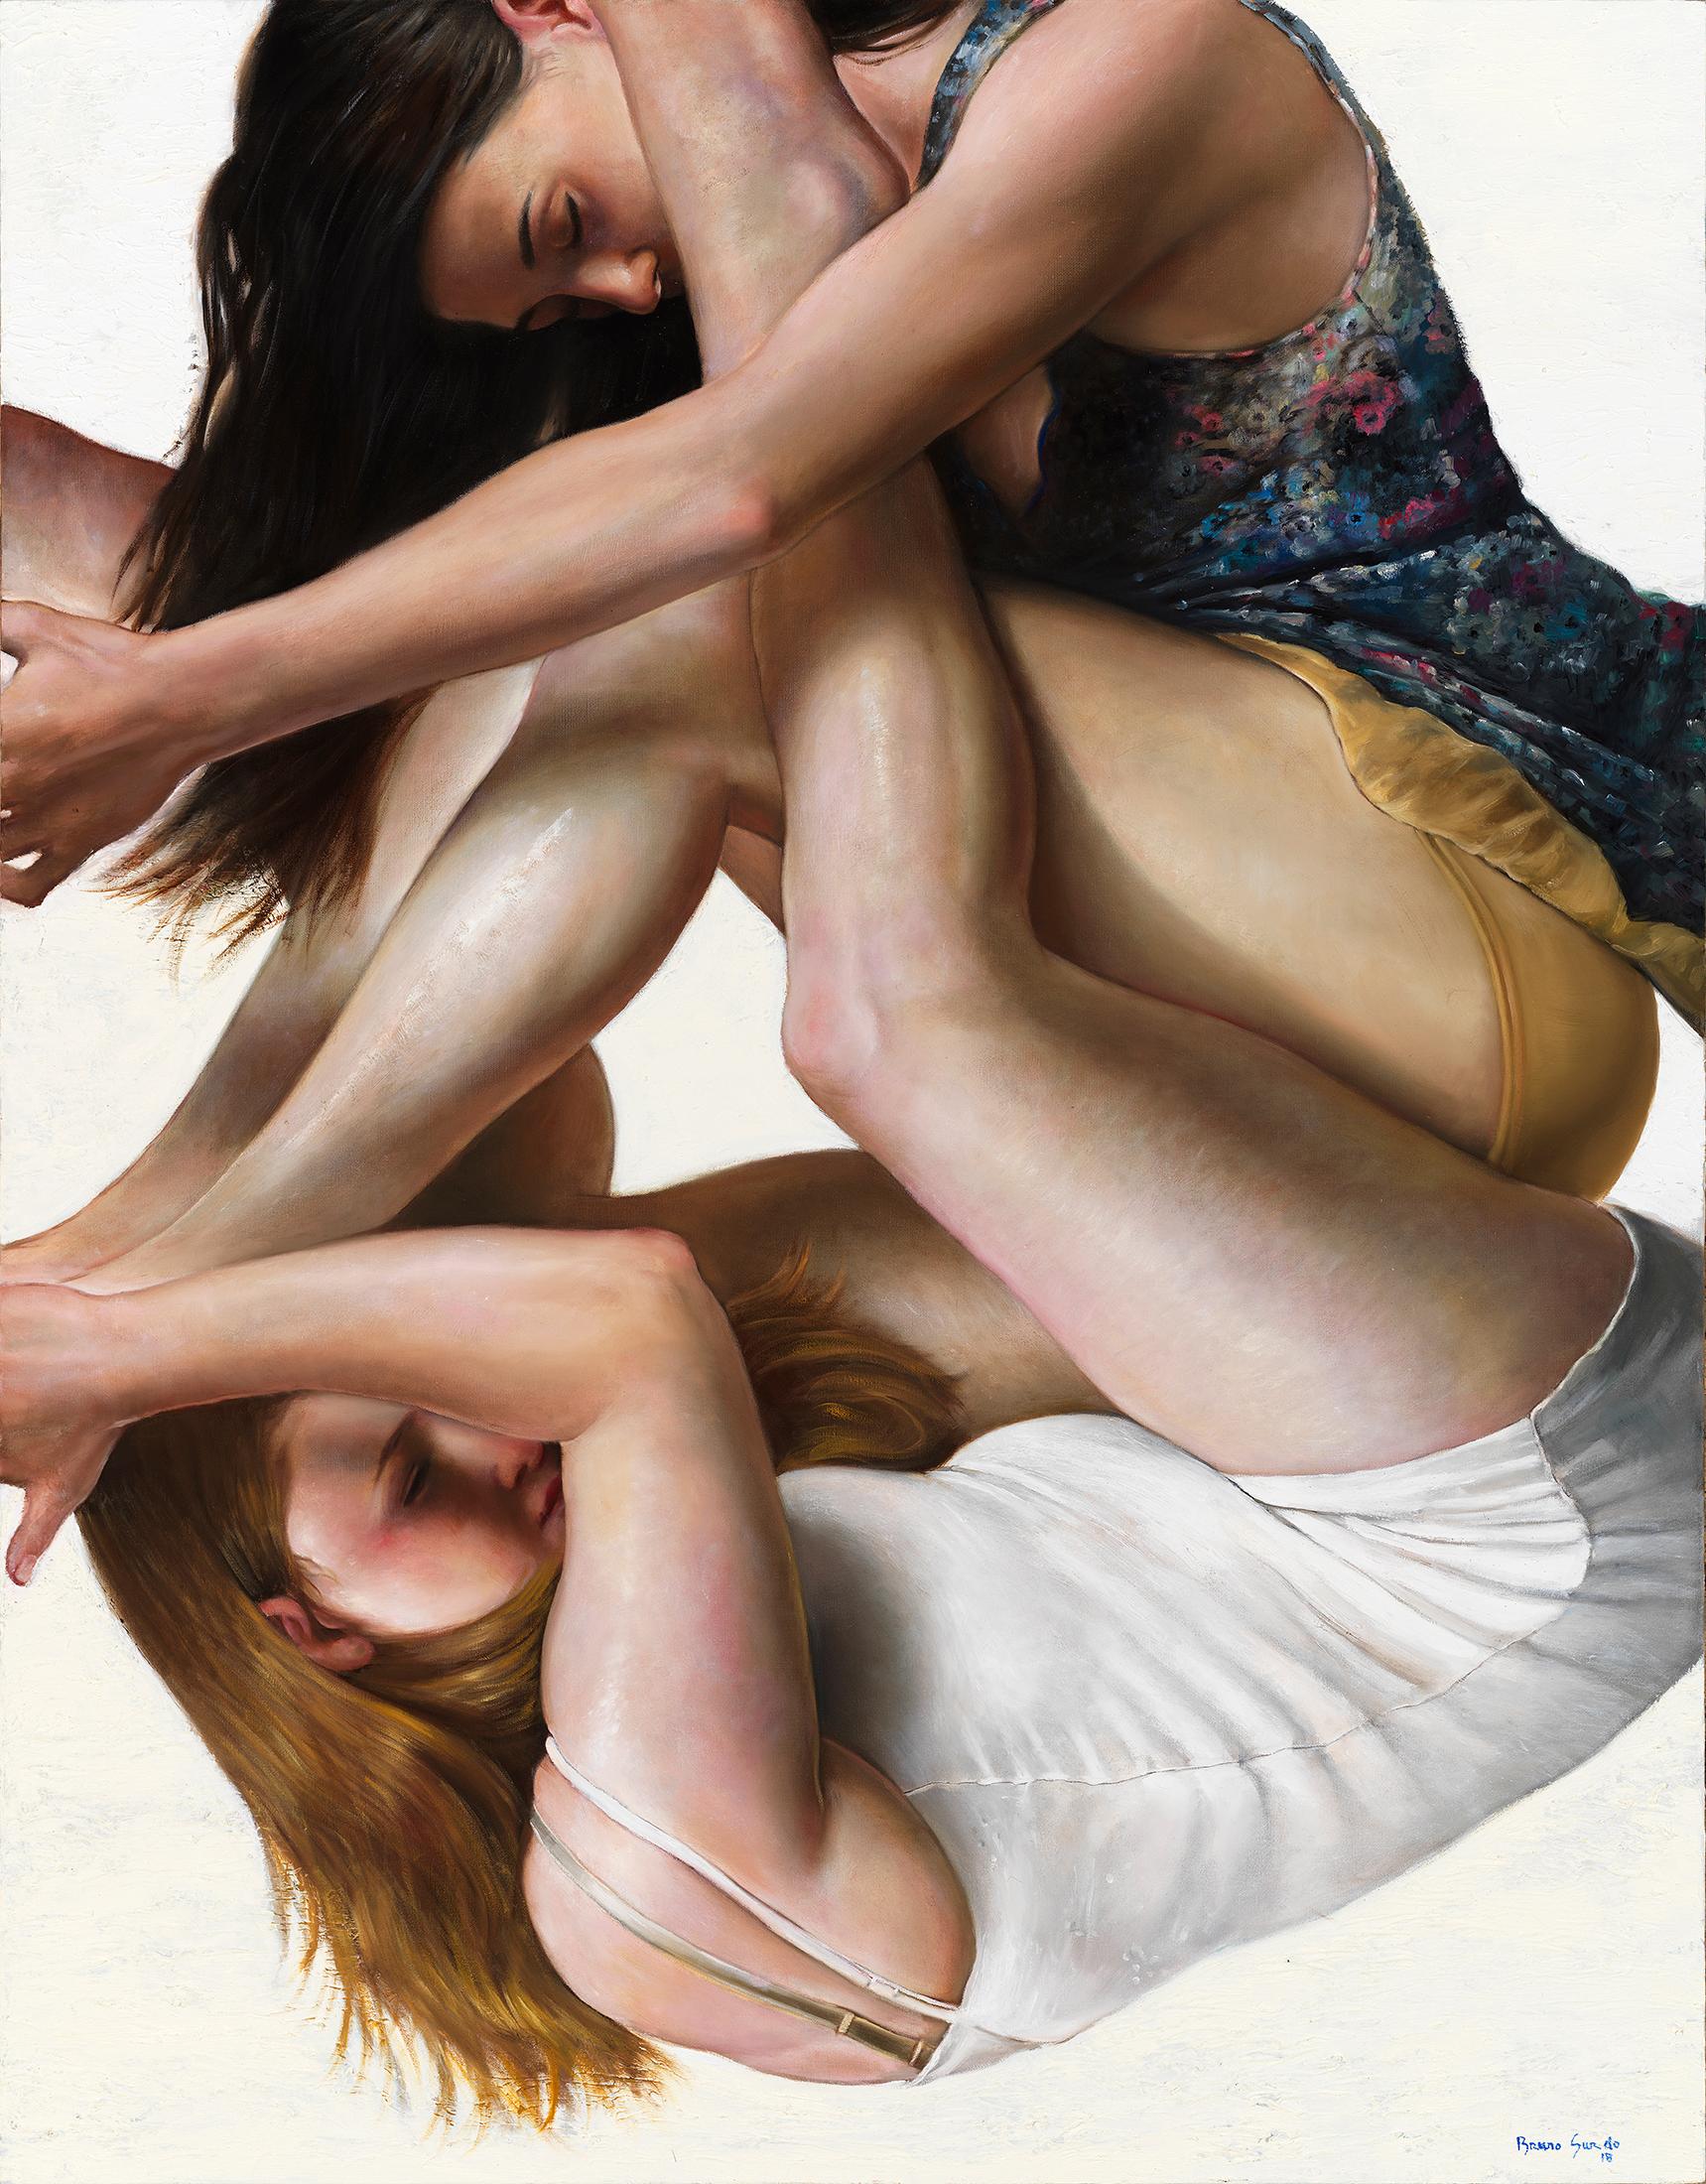 Entanglement - Original Oil Painting of Intertwined Female Figures Floating